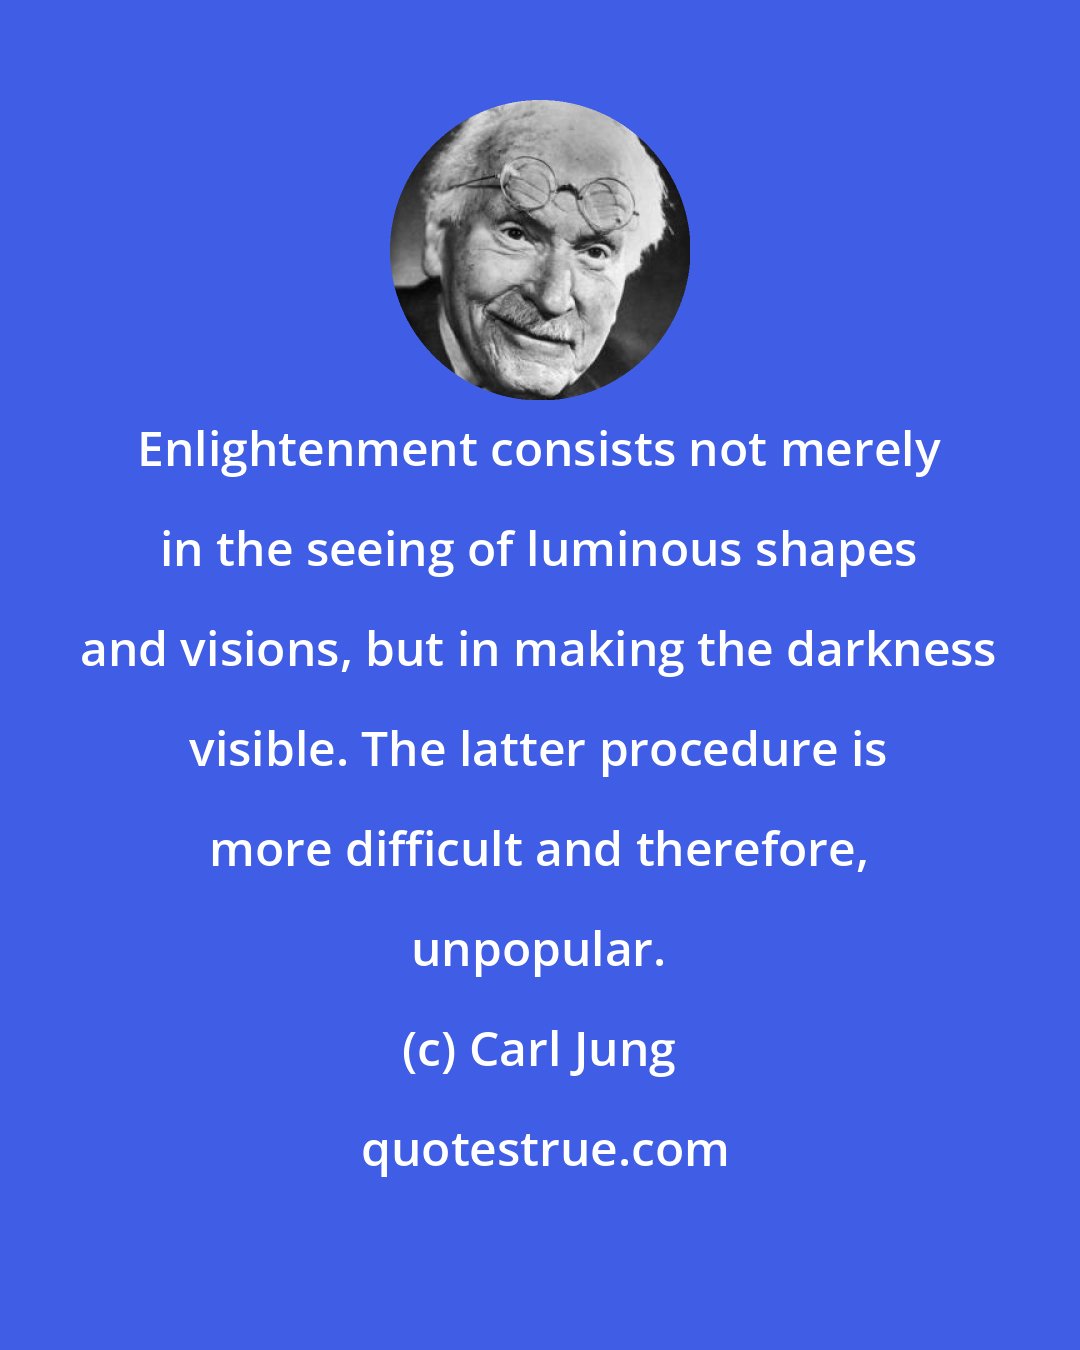 Carl Jung: Enlightenment consists not merely in the seeing of luminous shapes and visions, but in making the darkness visible. The latter procedure is more difficult and therefore, unpopular.